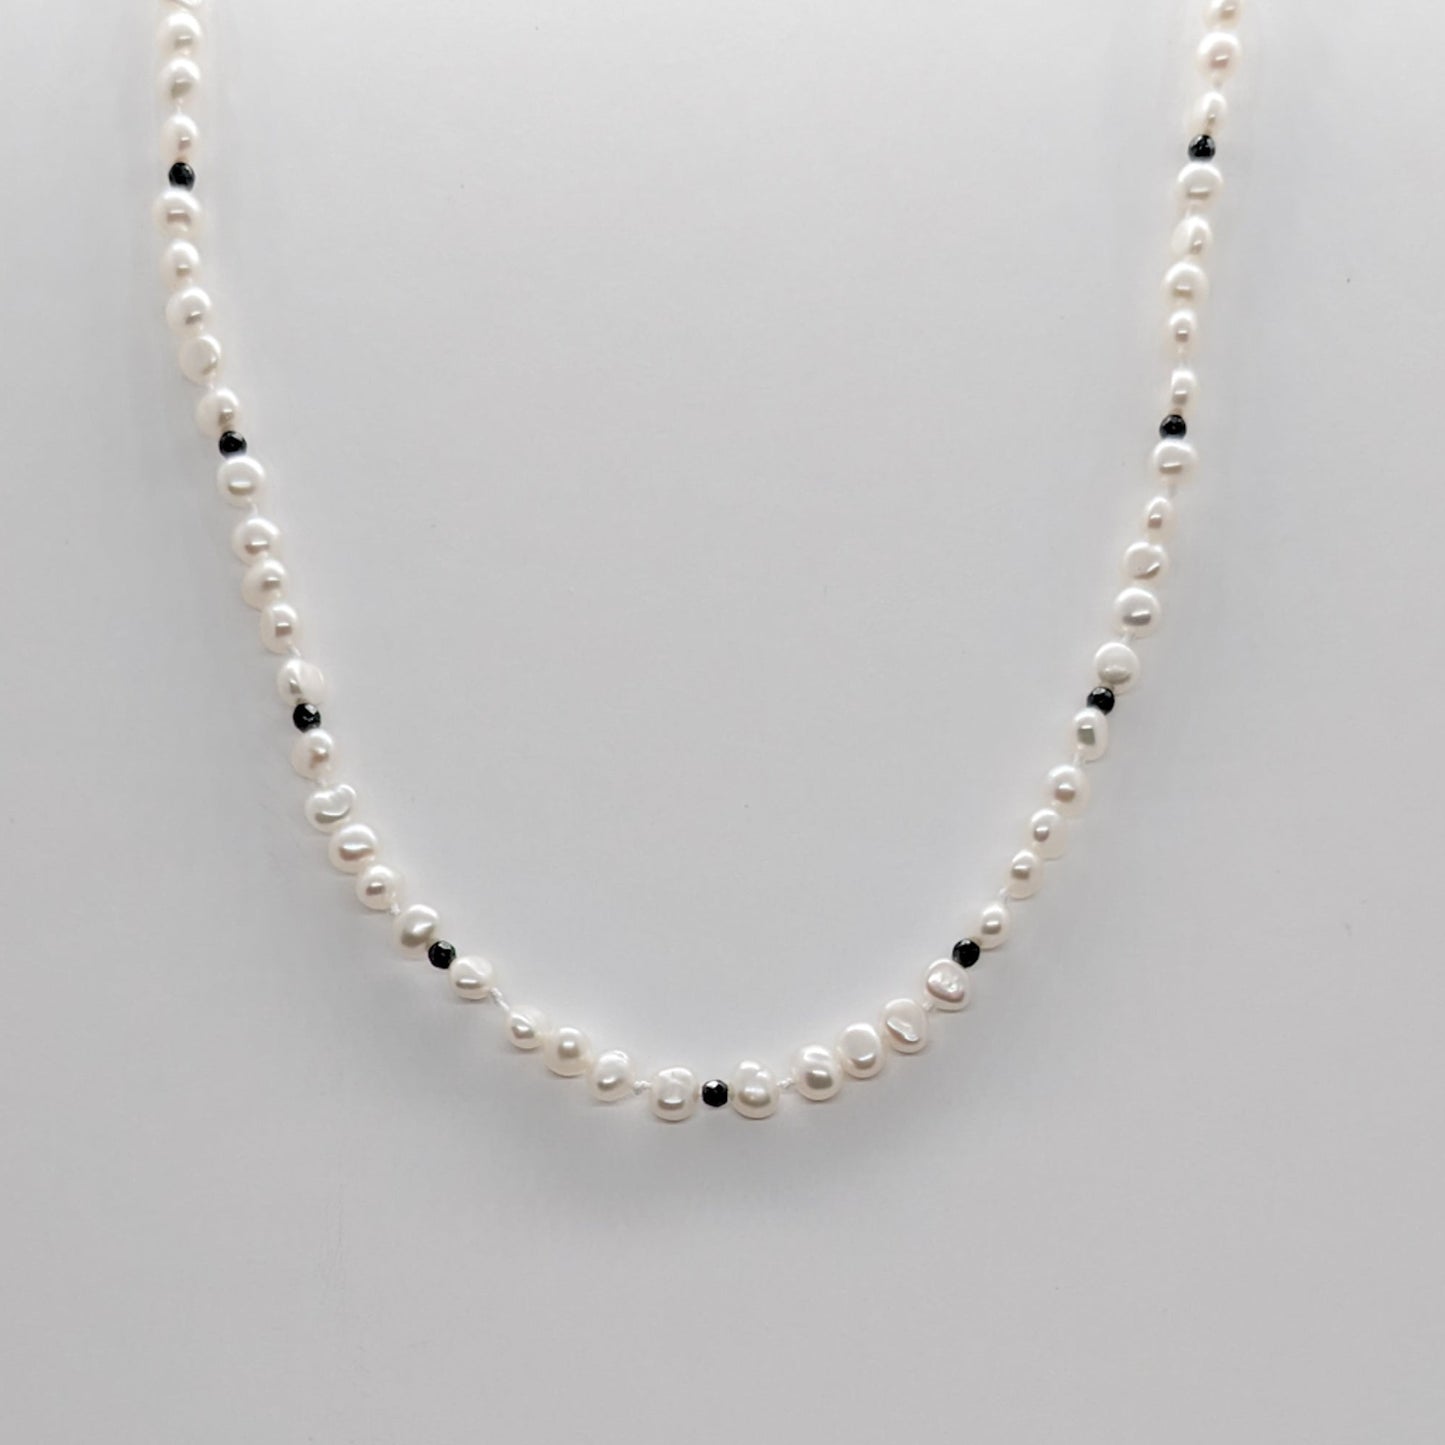 Necklace of keshi pearls and hematite pearls